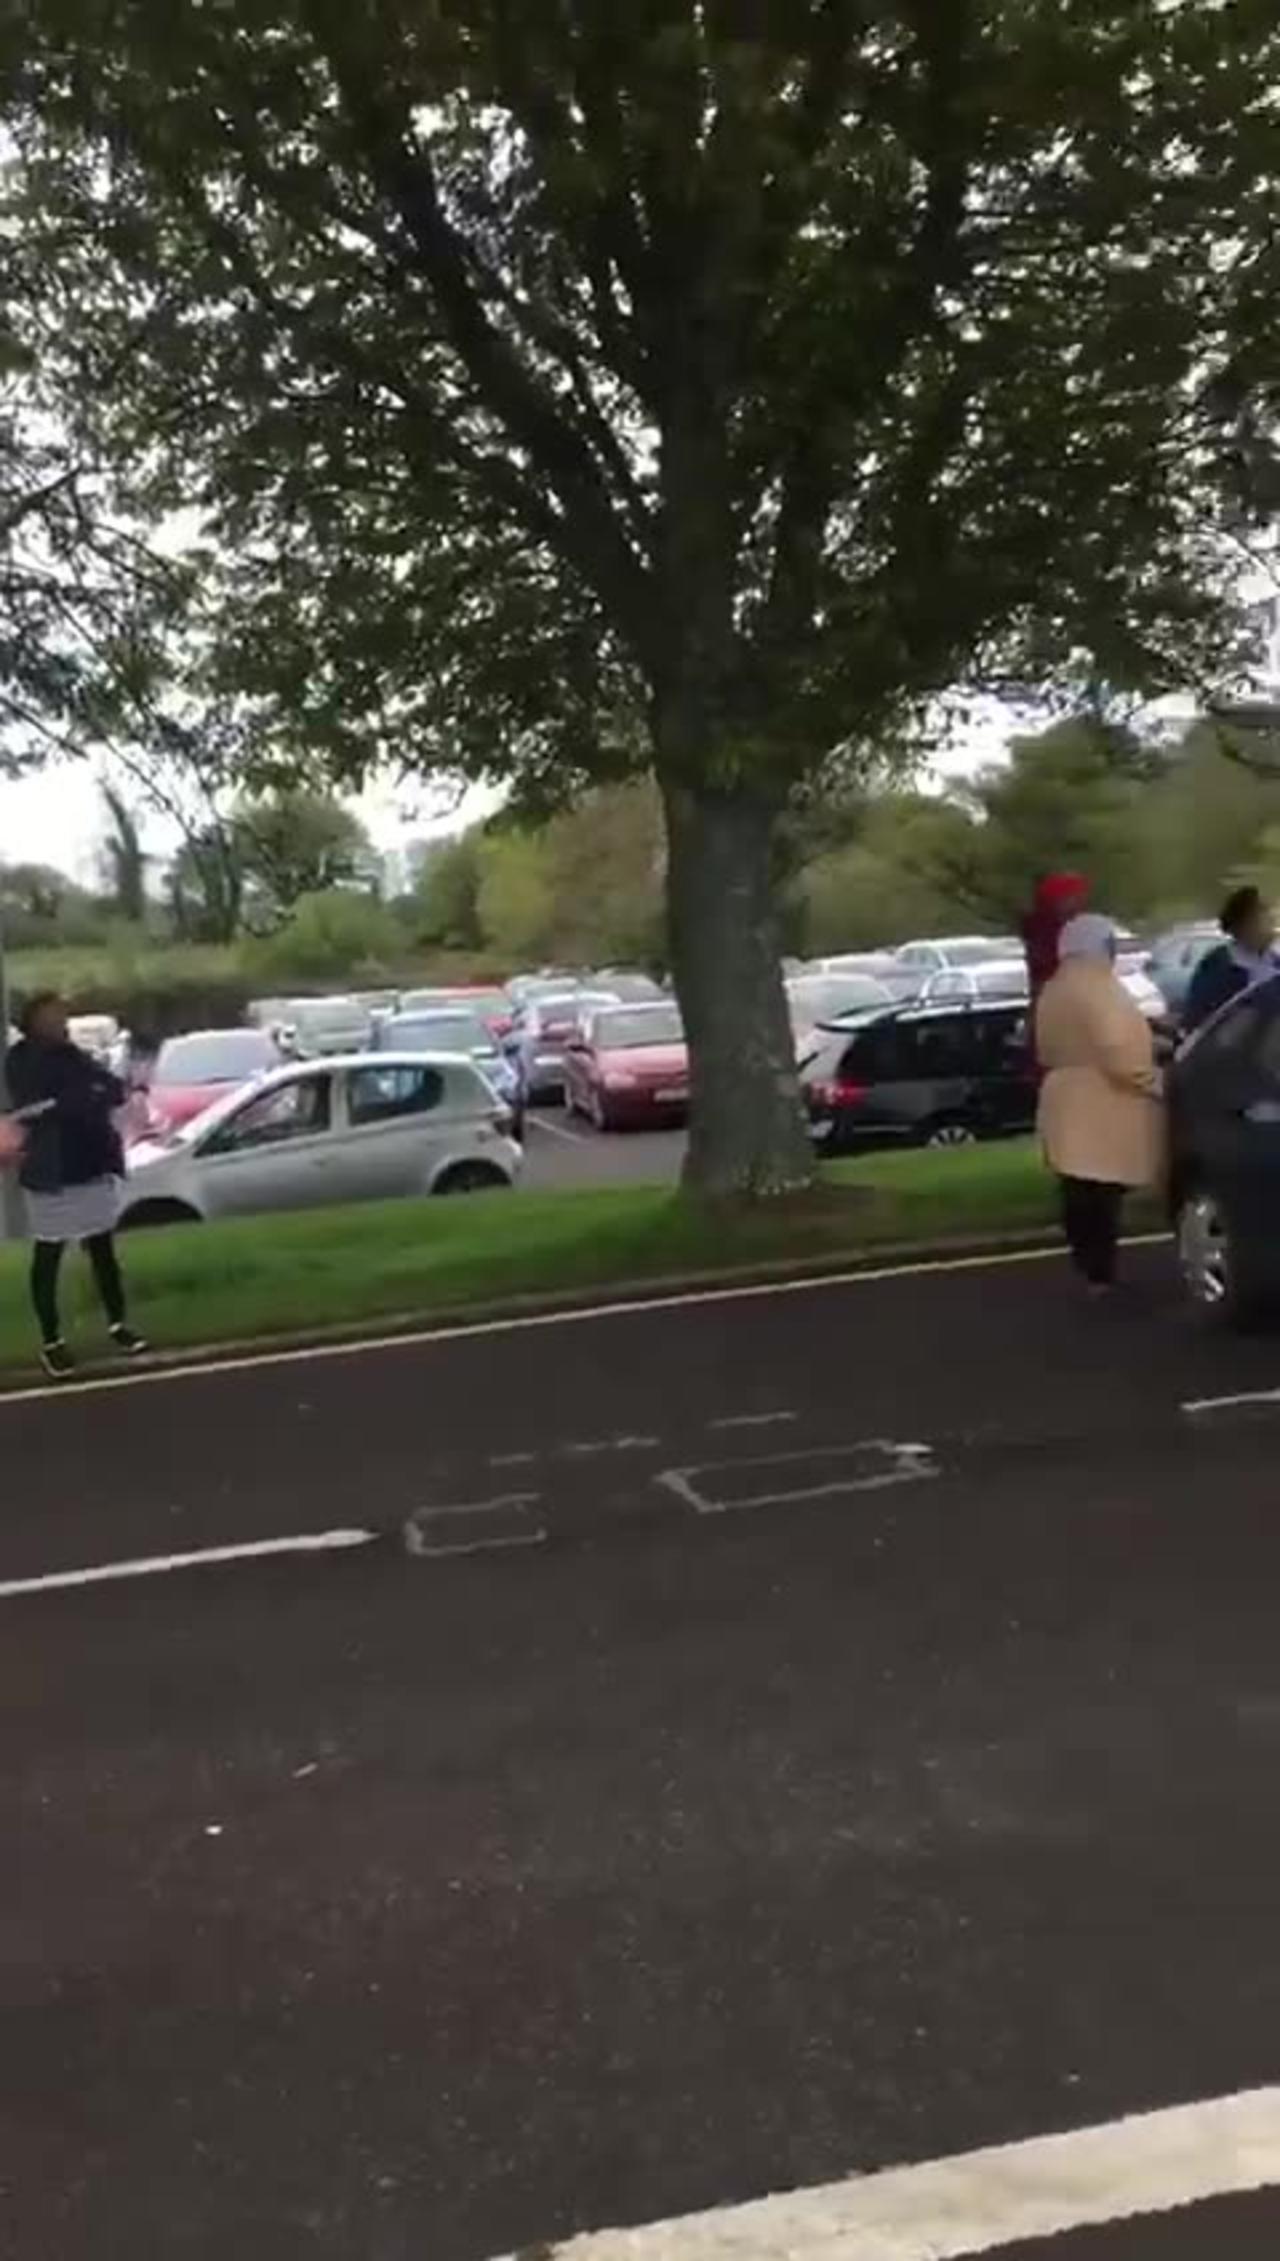 African 'asylum seekers' stage a protest where they stop traffic and attack Irish people.